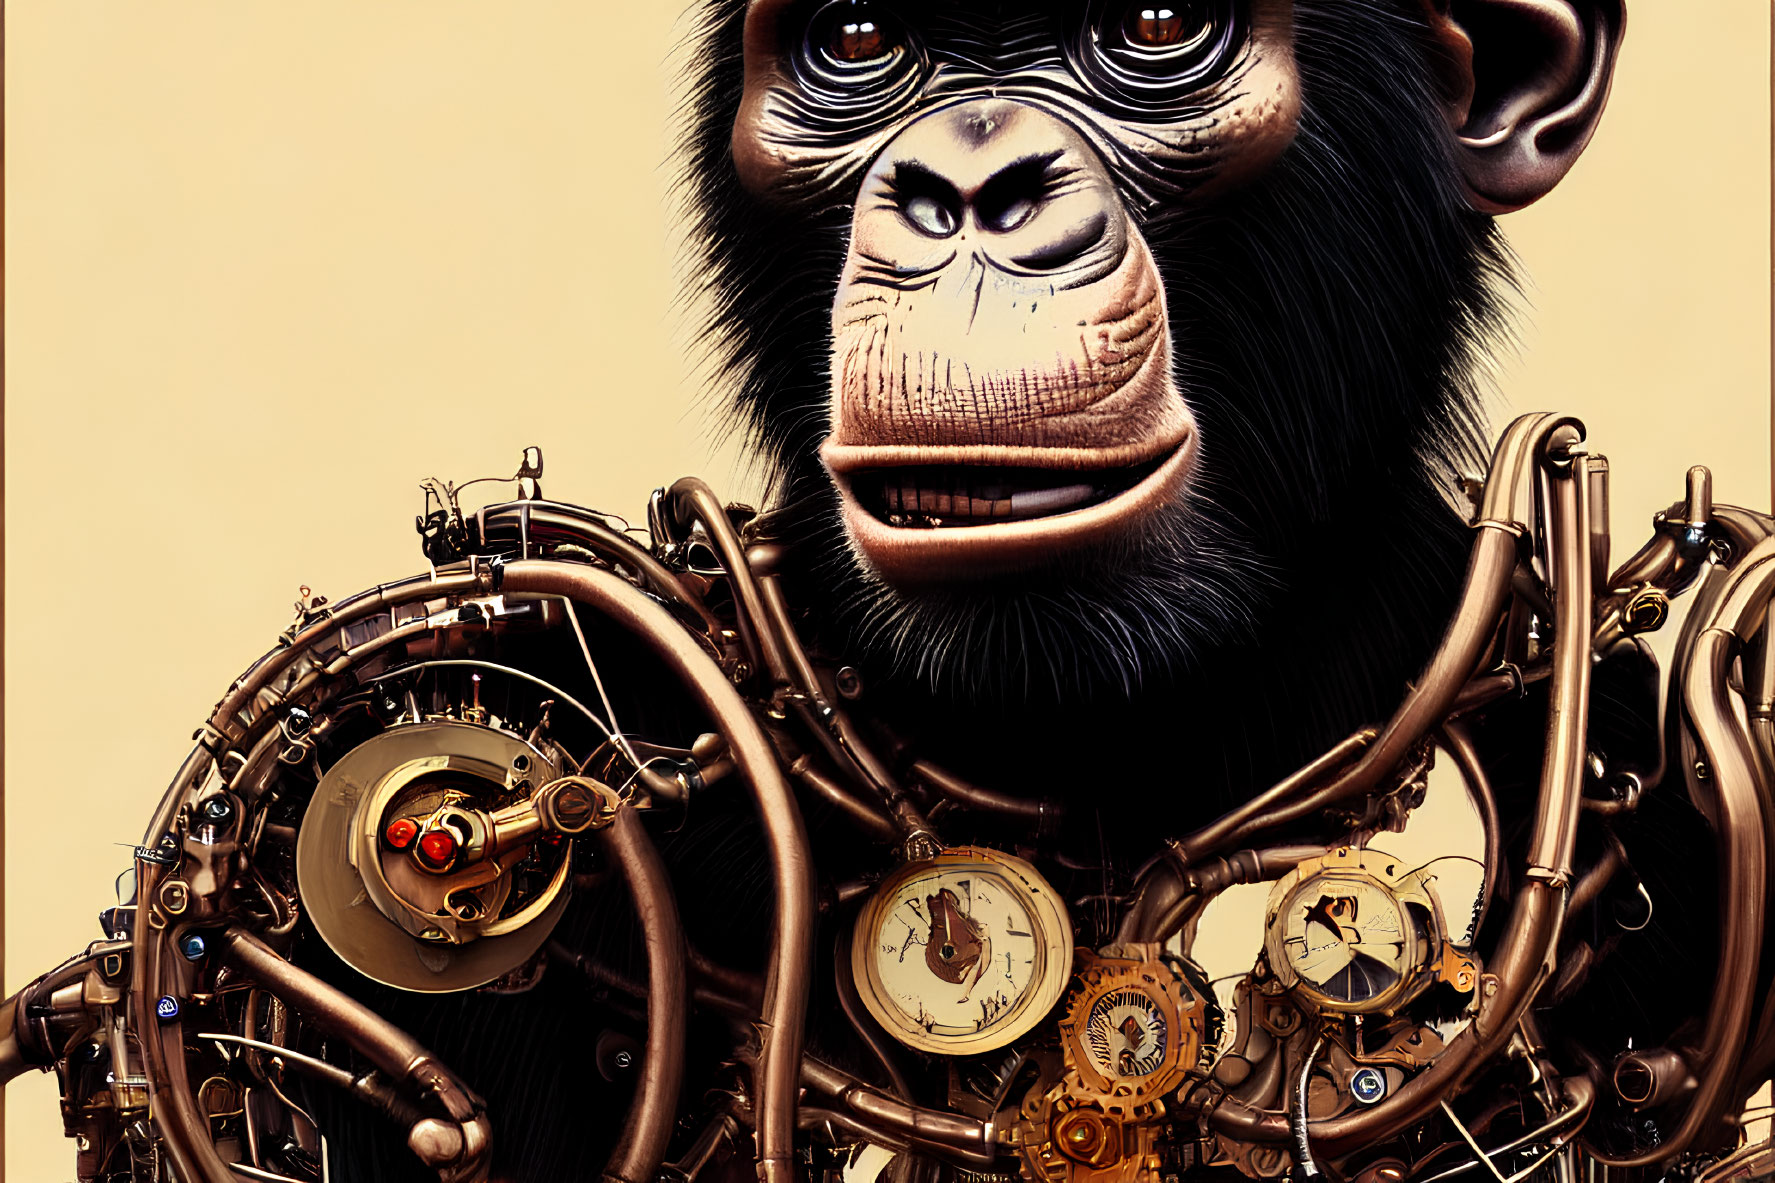 Chimpanzee illustration with steampunk mechanical body on tan background